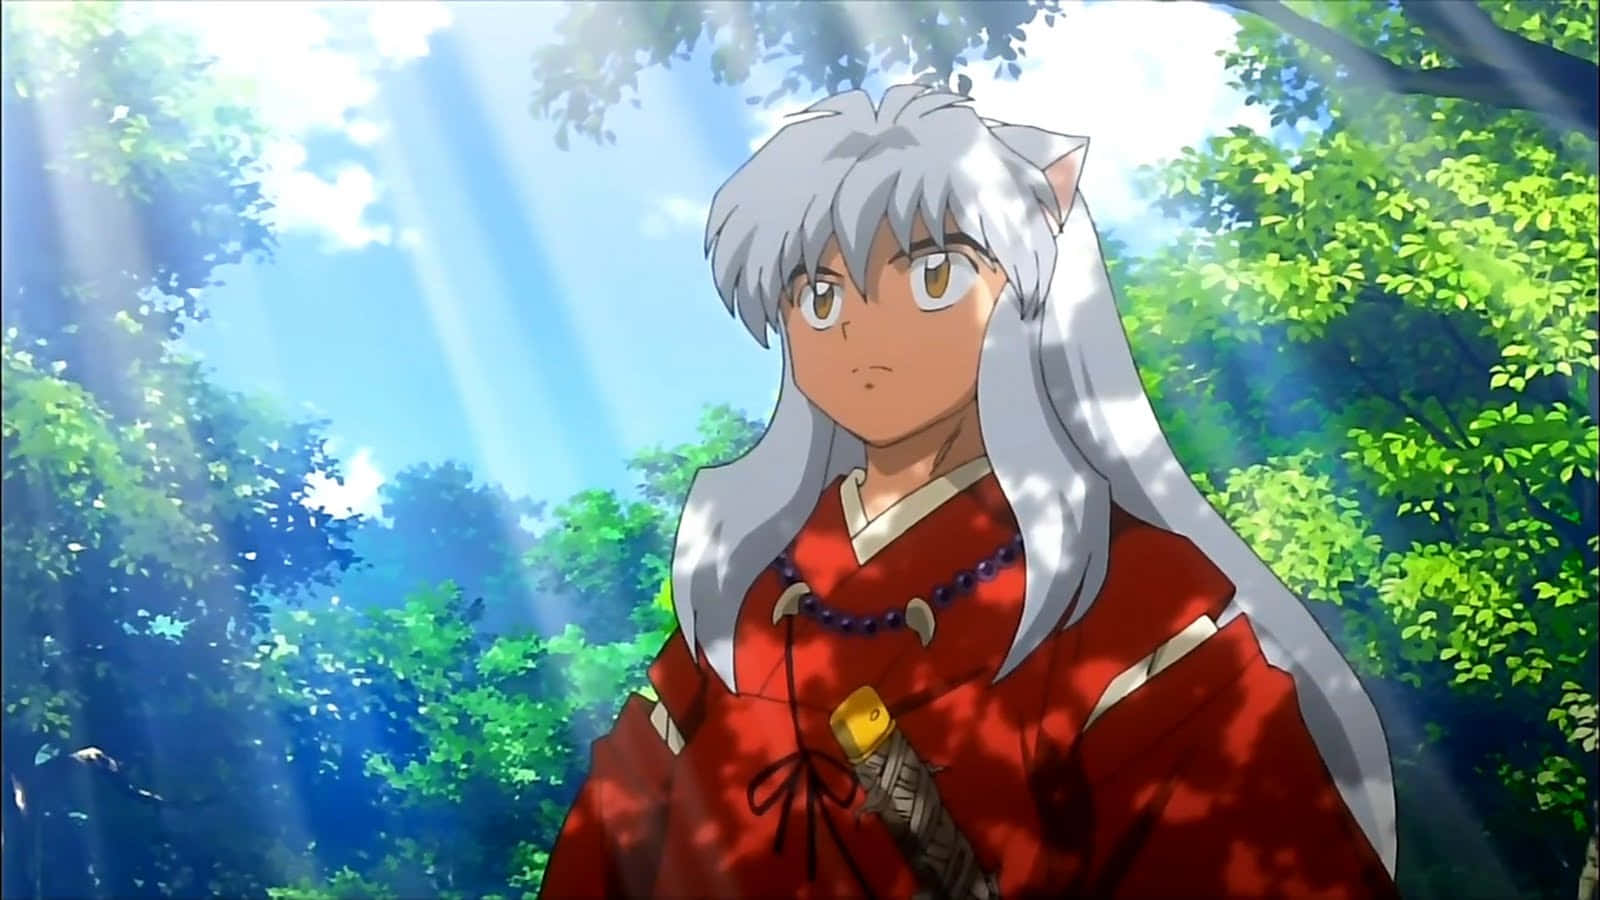 Feel the power of time as Inuyasha fights alongside Kagome and his friends! Wallpaper